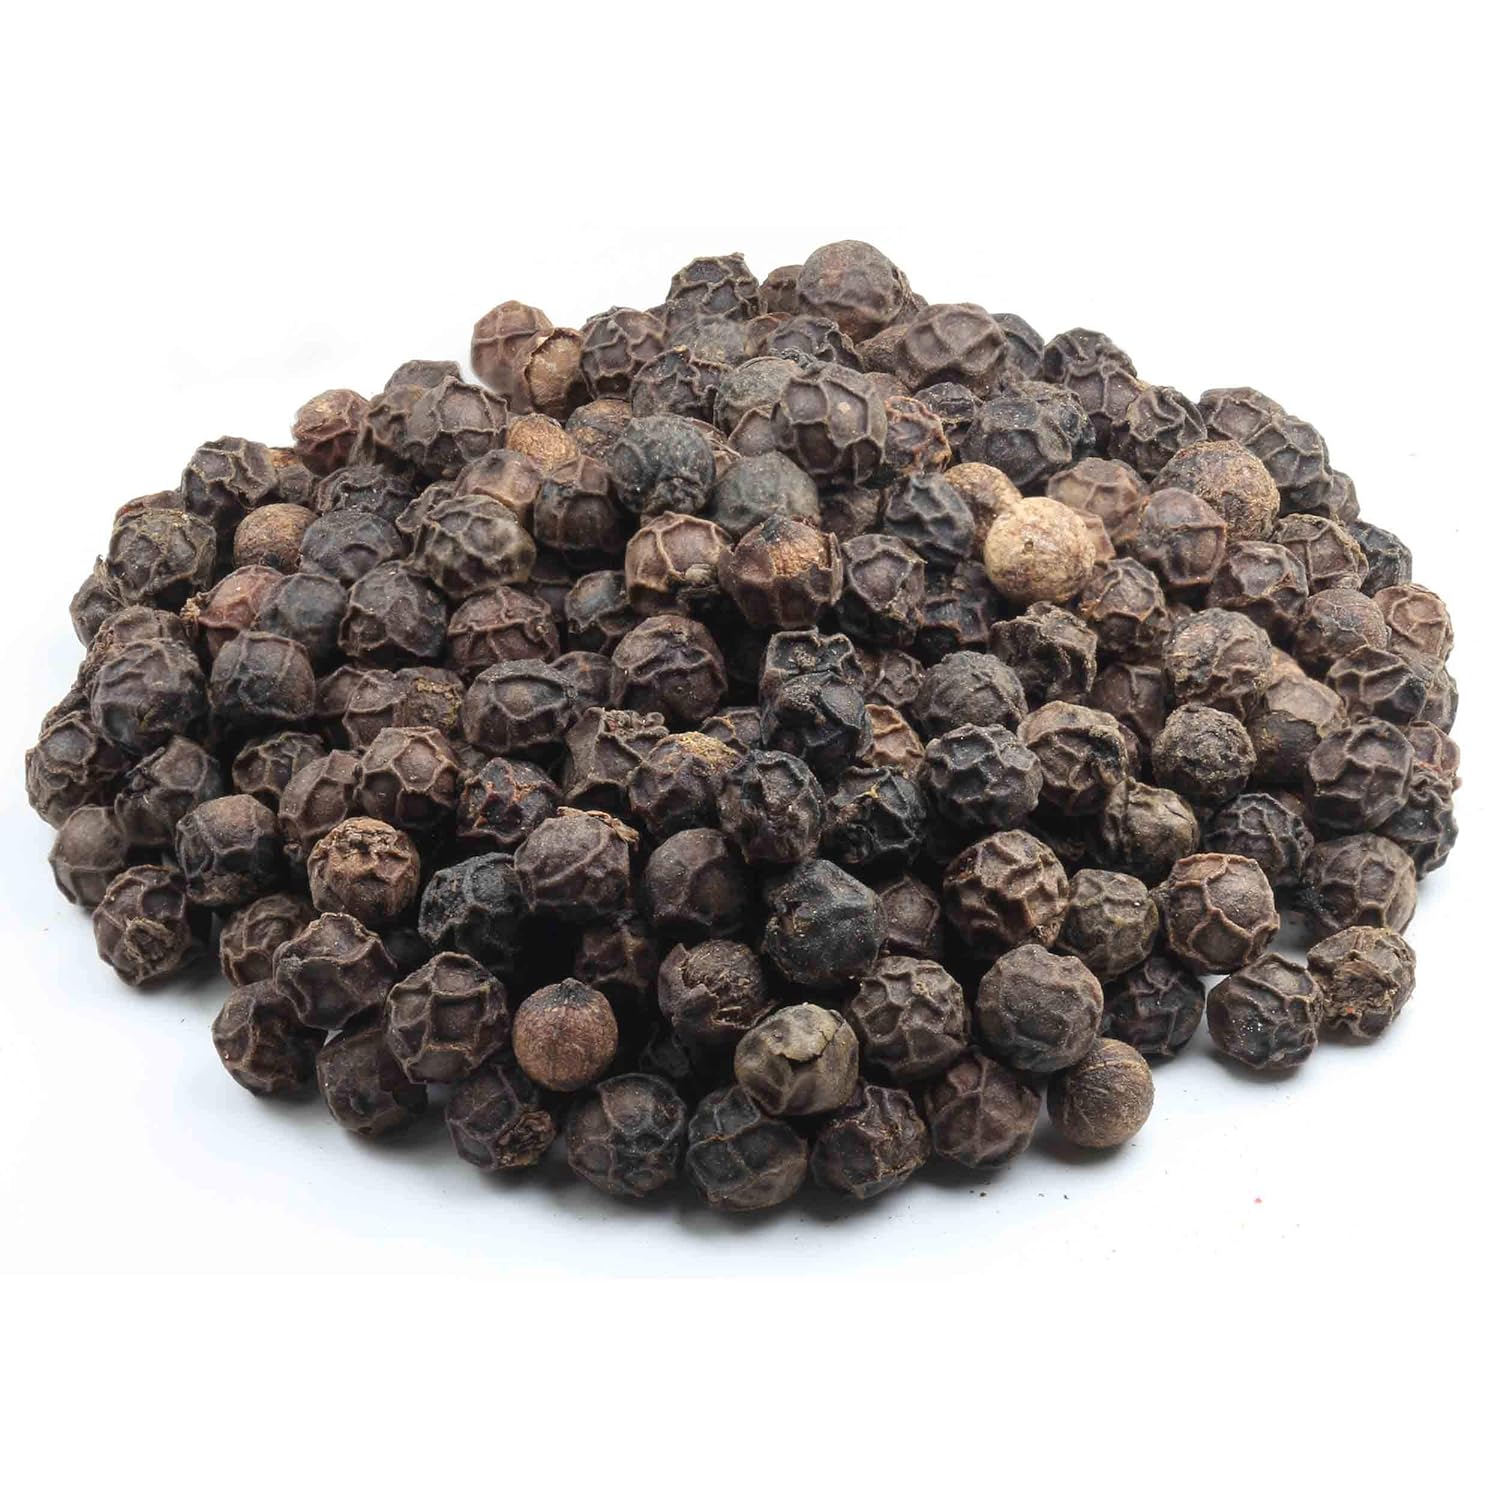 Amazon Brand - Happy Belly Tellicherry Black Pepper Whole Peppercorn, 3.5 ounce (Pack of 1)